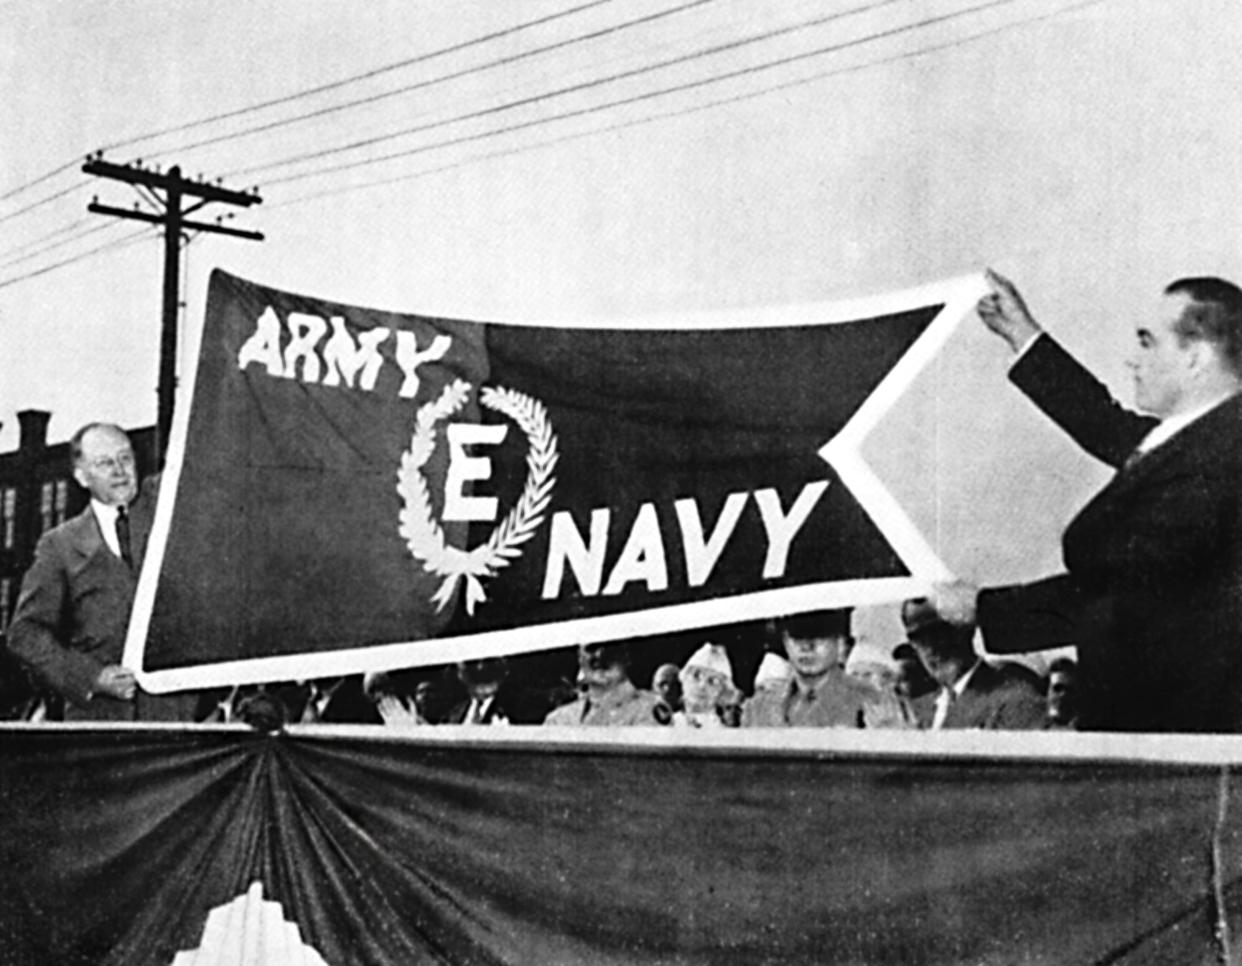 On August 18, 1942, Savage Arms in Utica received from the US War Department the Army - Navy “E” Flag for high achievement in the production of equipment for World War II, which was raging at the time. Its thousands of employees also received “E” lapel pins. Exhibiting the flag in a plant ceremony were Fred Hickey, left, the company president and Bob Havens, who represented the employees. Among the items Savage made were .50 caliber Browning aircraft machine guns and Thompson submachine guns. The plant—recently razed—was on Turner Street in the city’s east end and sat on 32 acres. Its parking lot accommodated 2,500 vehicles.